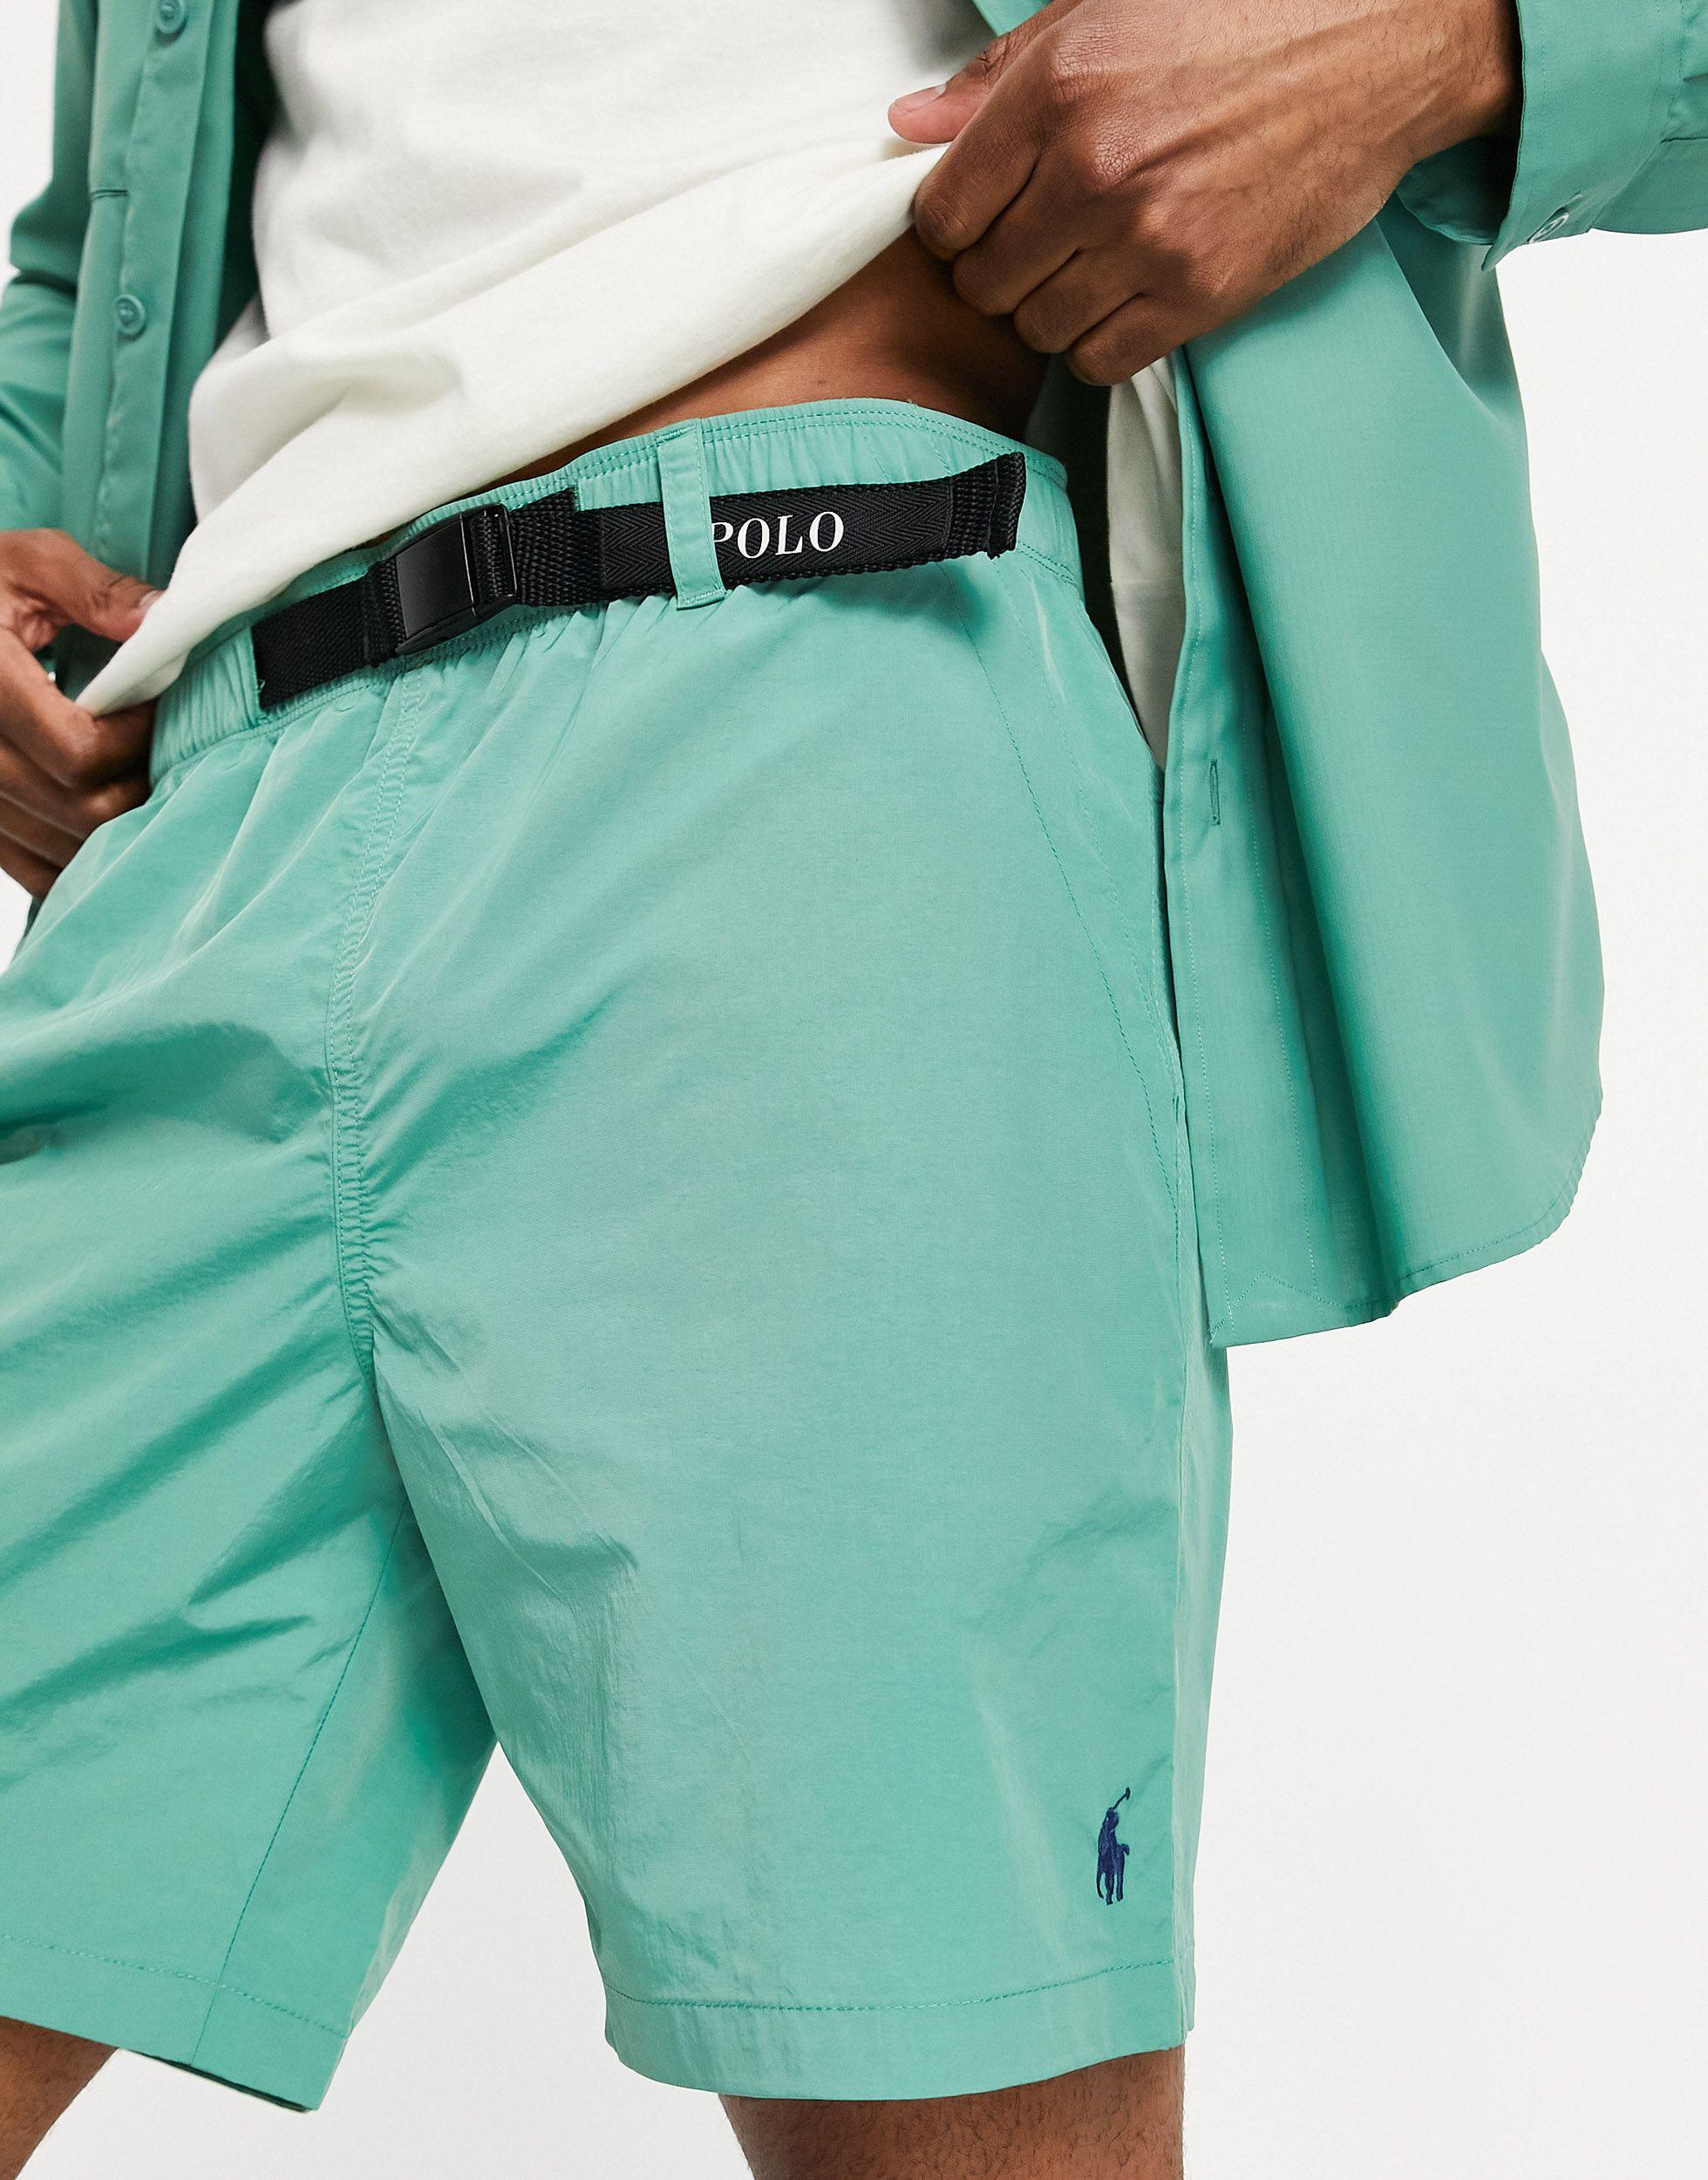 Polo Ralph Lauren X Asos Exclusive Collab Ripstop Shorts in Green for Men -  Lyst